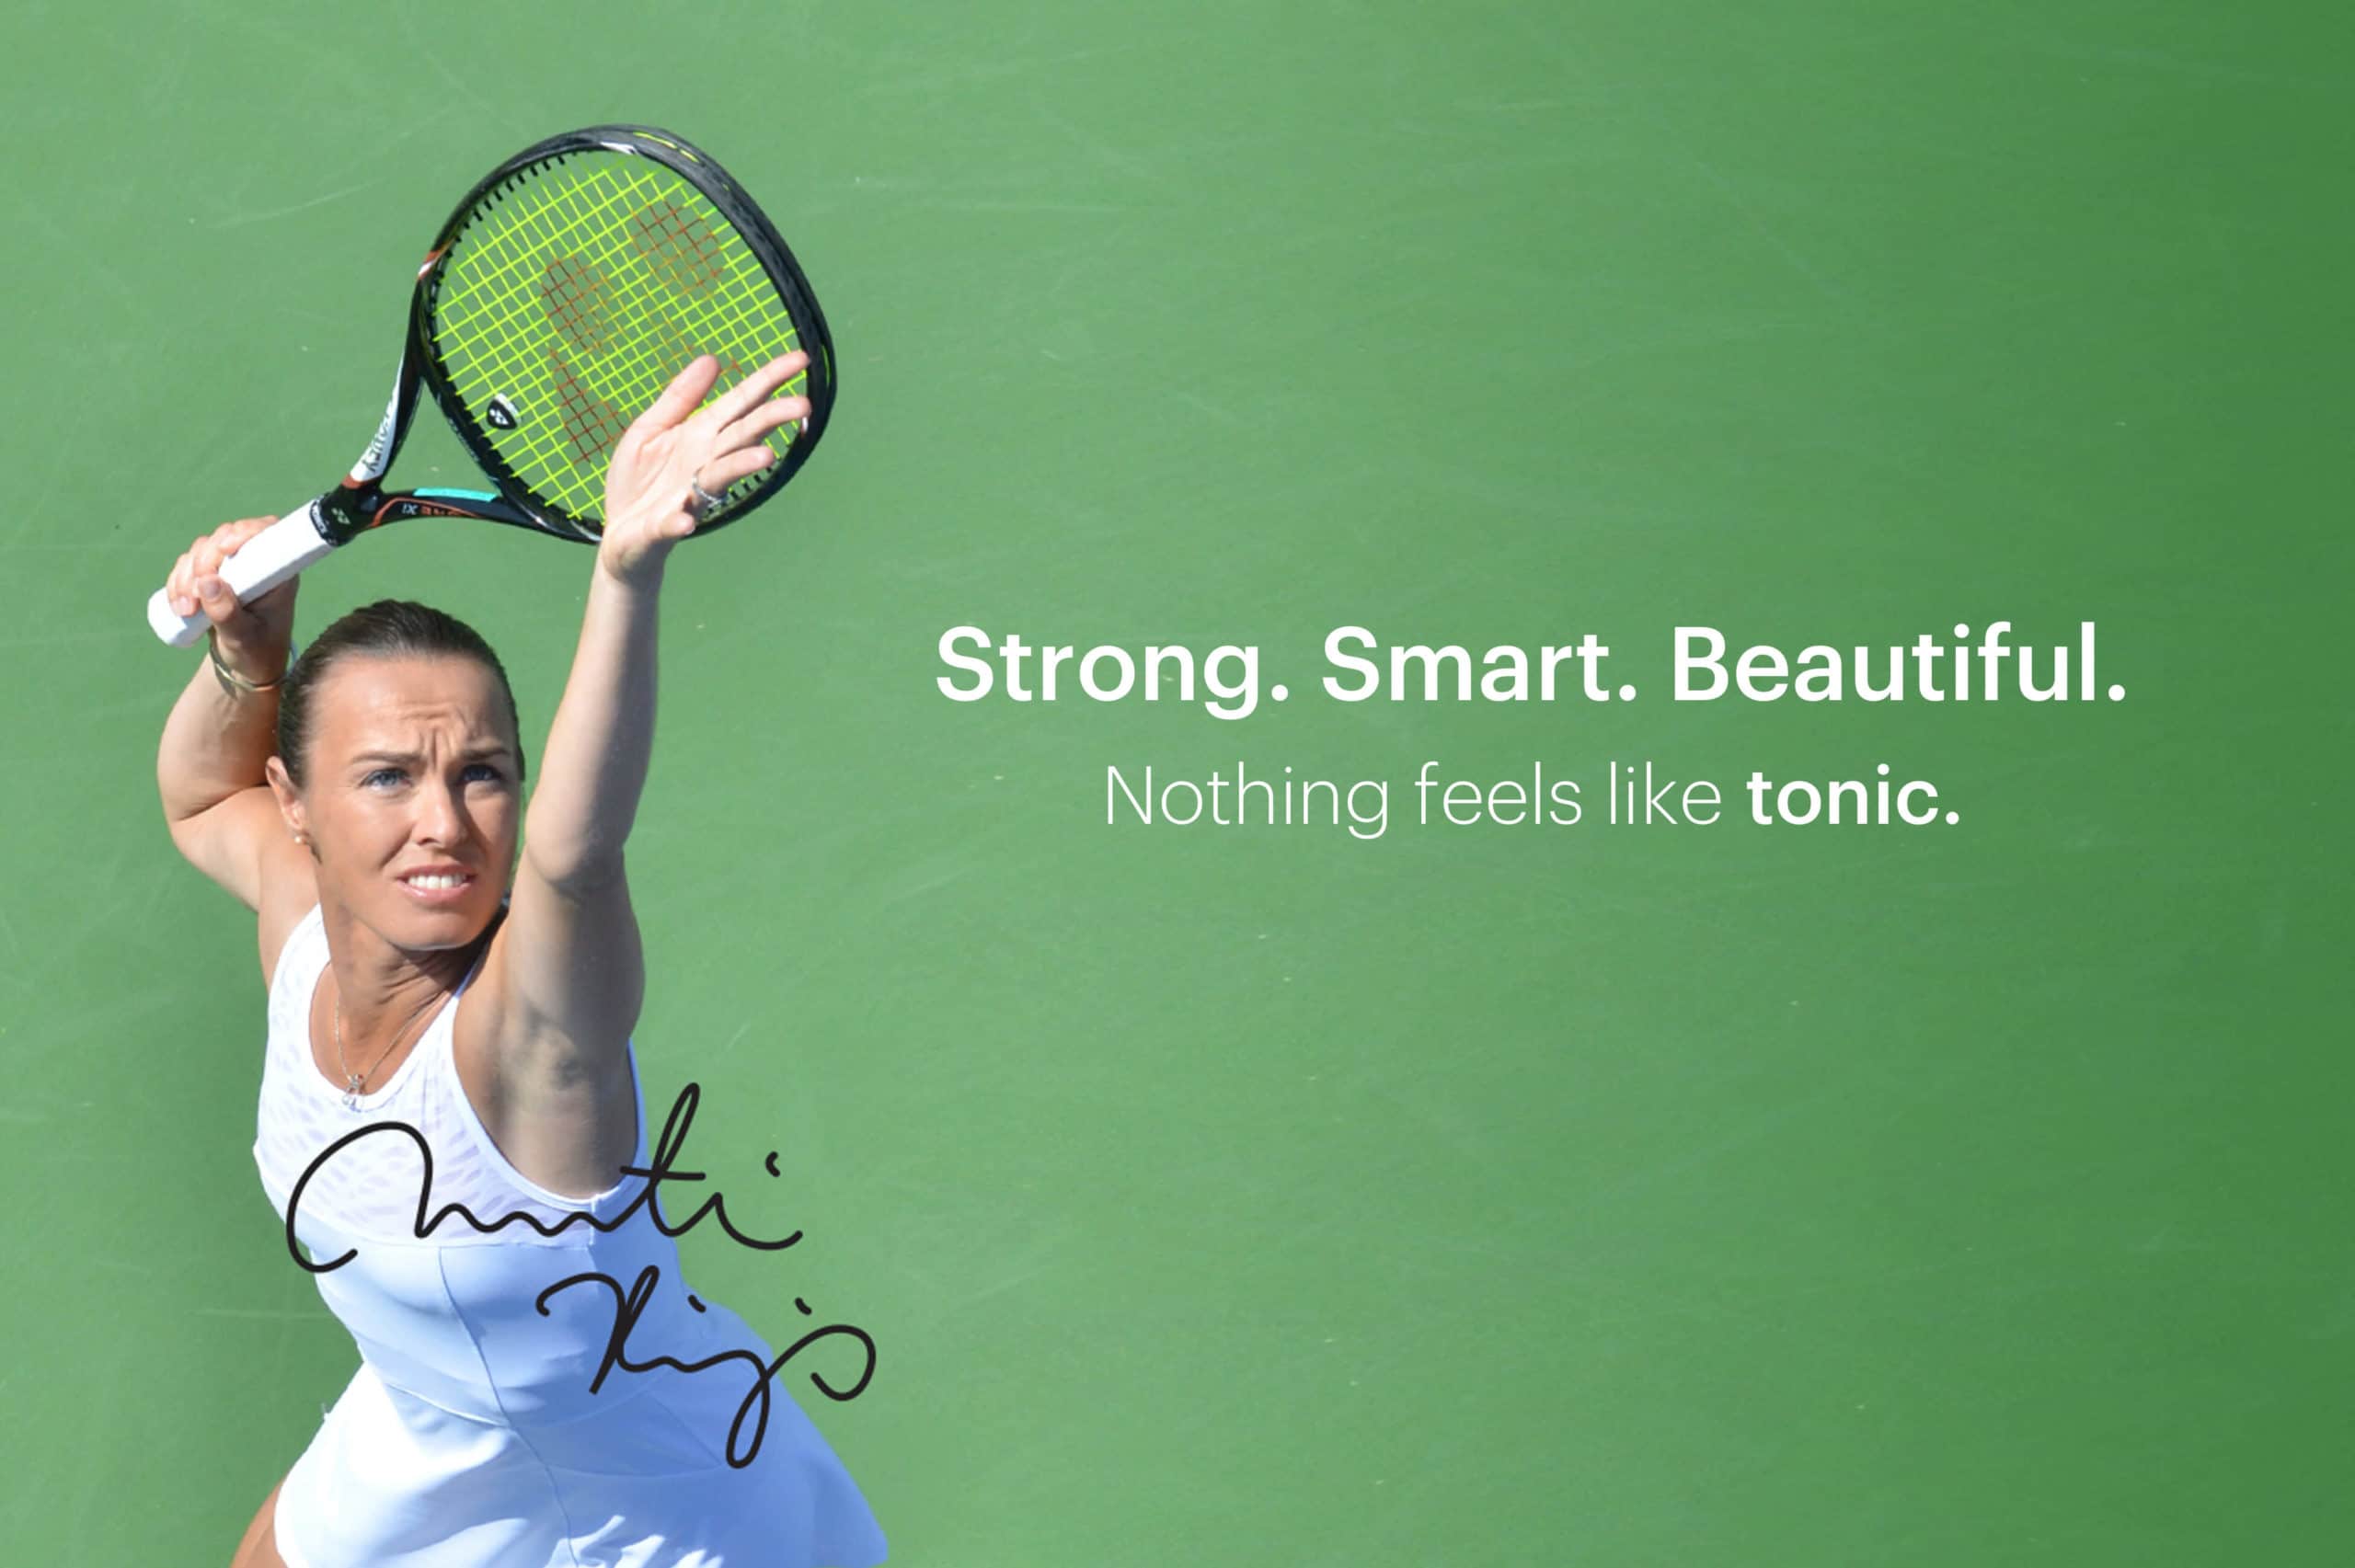 Tonic Active and Martina Hingis, an Active Wear Company in Vancouver, BC